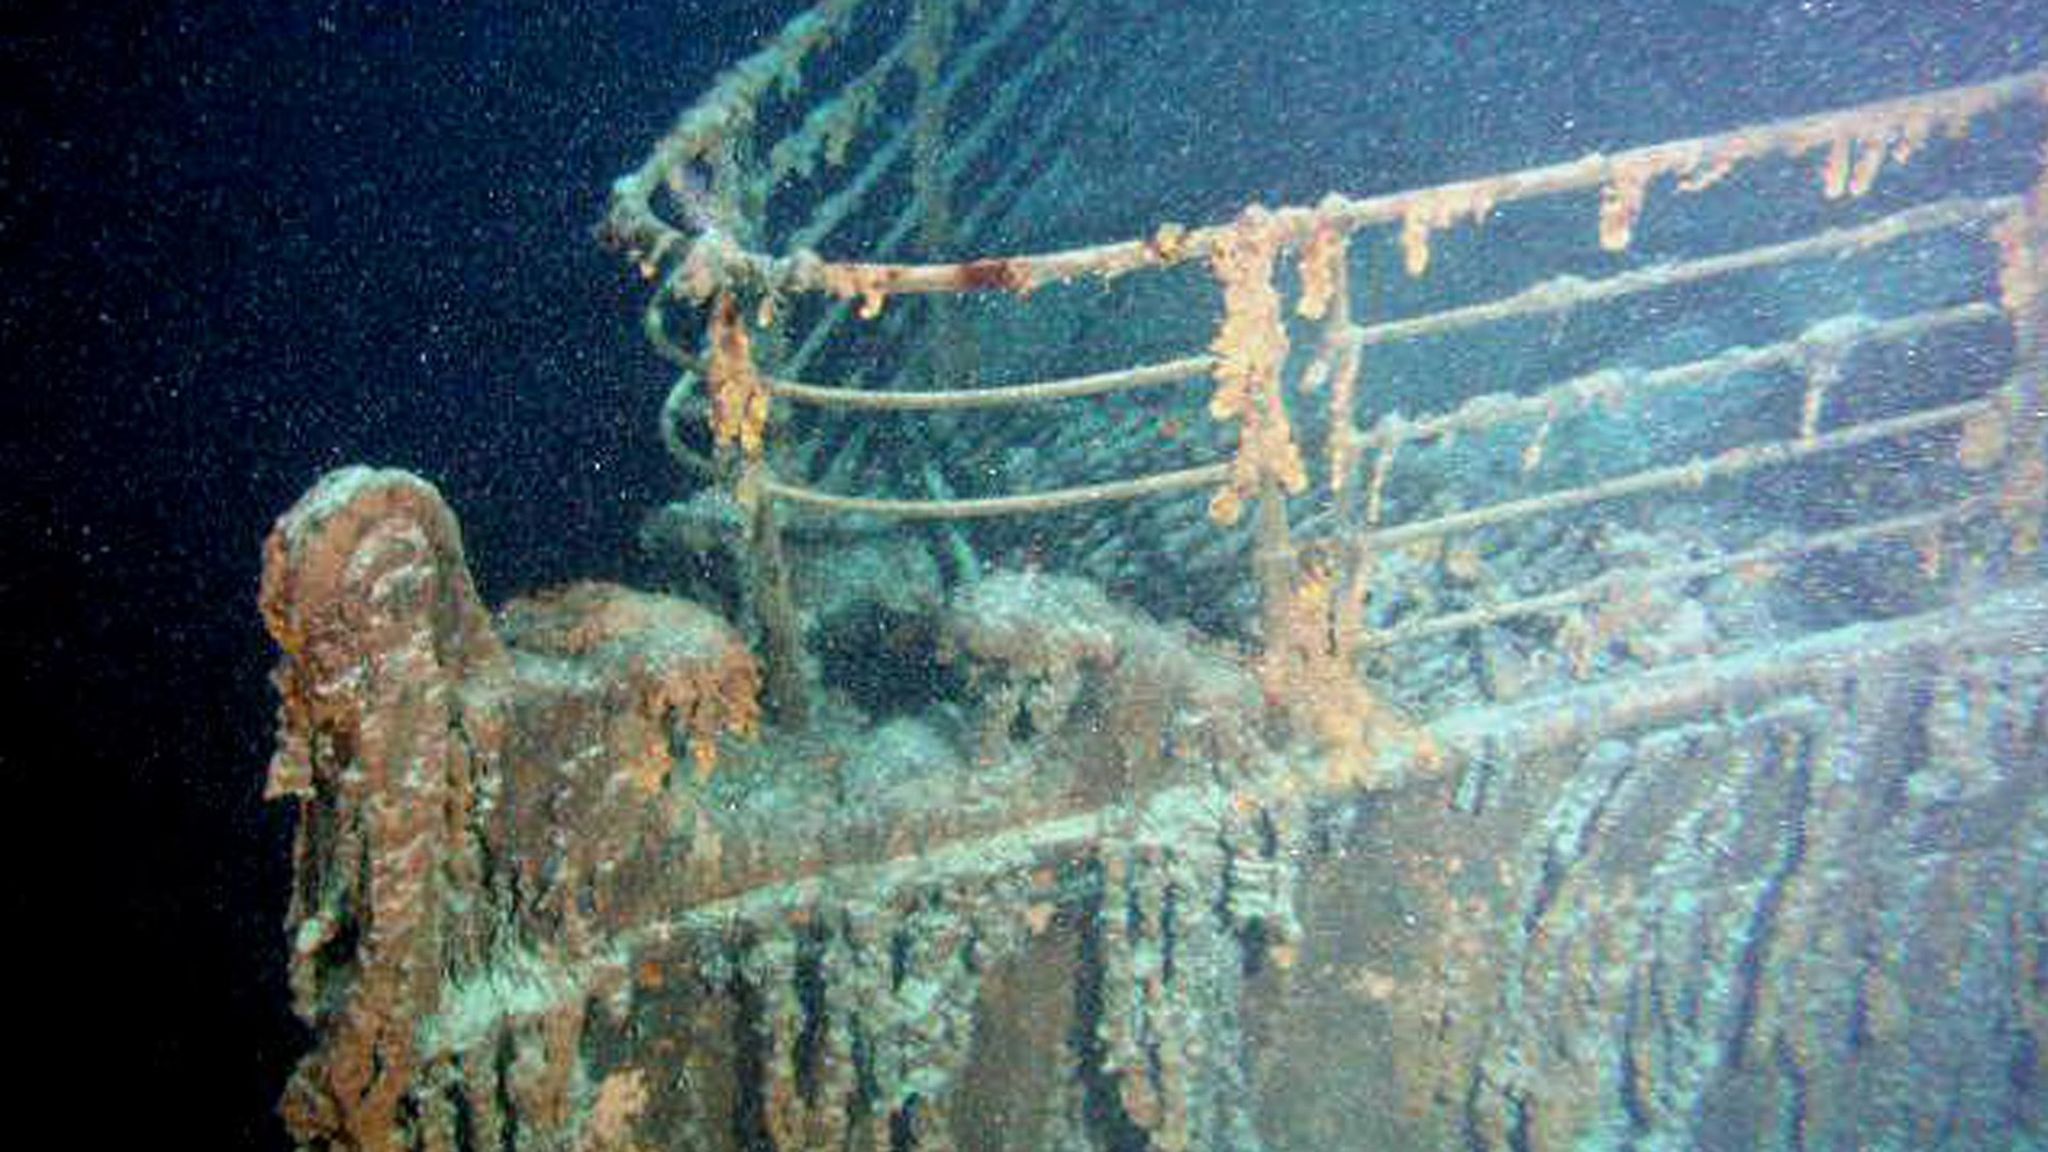 Titanic Shipwreck Photos: See Original Images from 1985